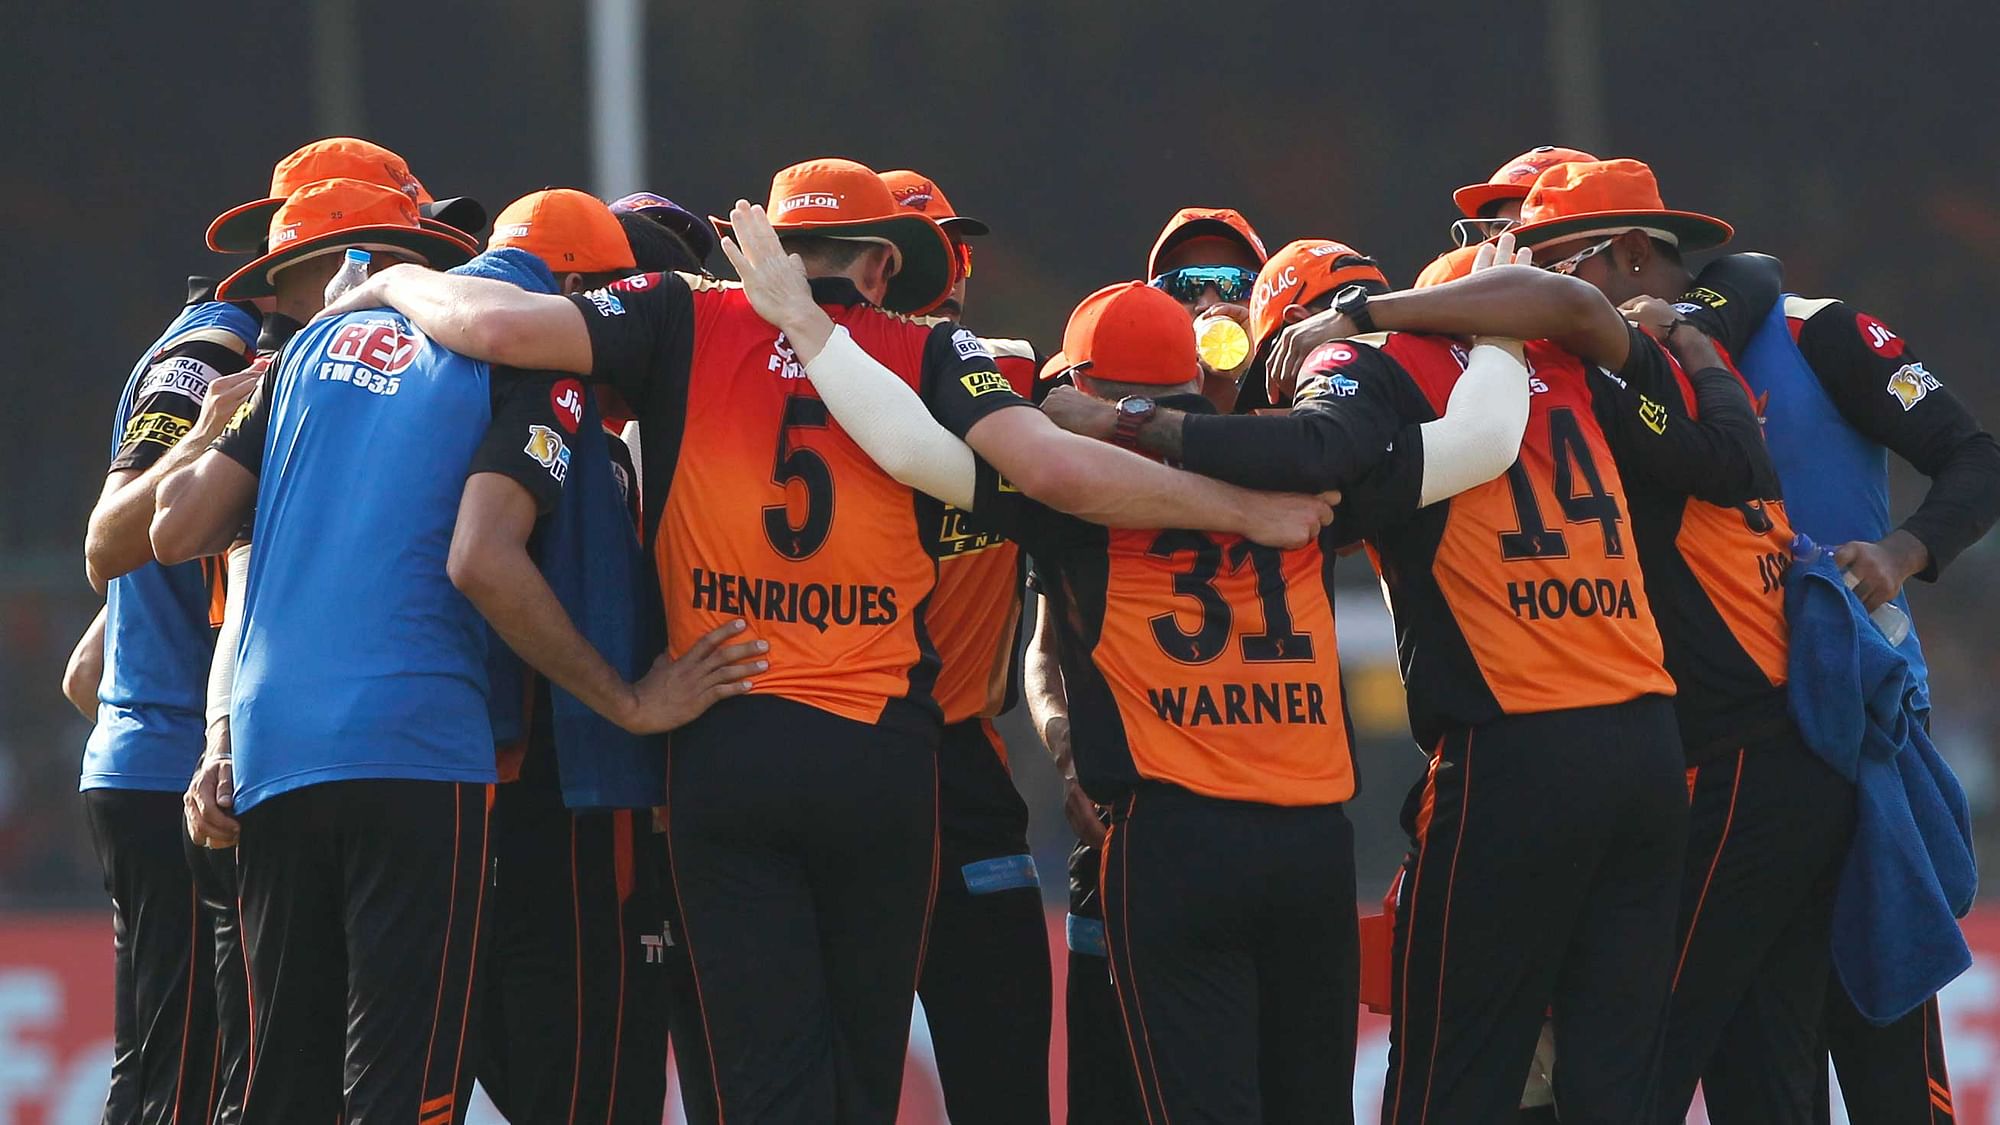 Sunrisers Hyderbad captain David Warner believes his side’s death bowling is “probably the best” in the Indian Premier League.